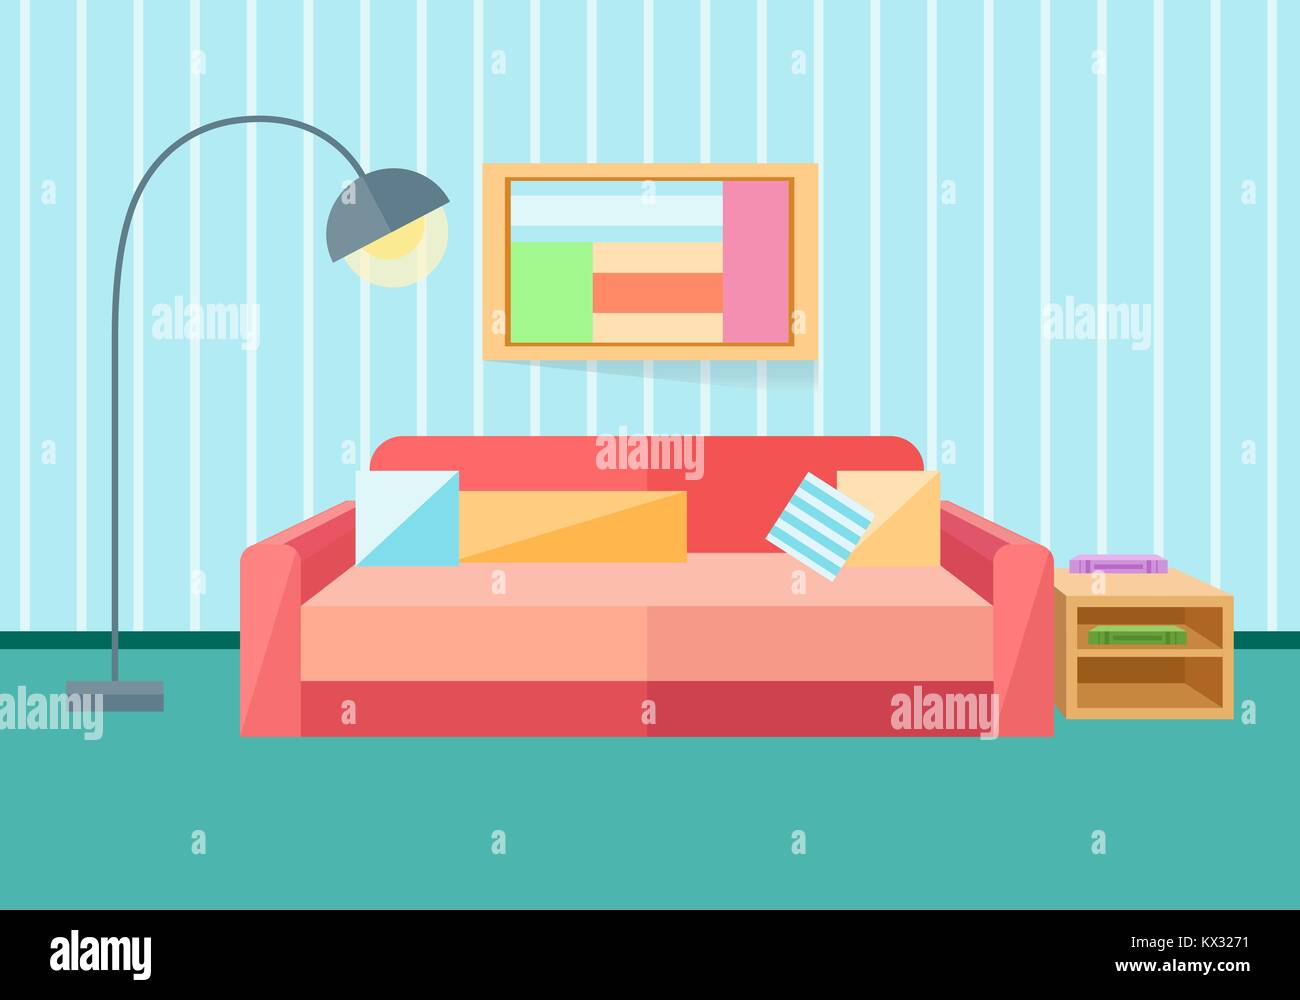 Interior in a flat style. Sofa, lamp. Vector illustration in a flat style. Stock Vector